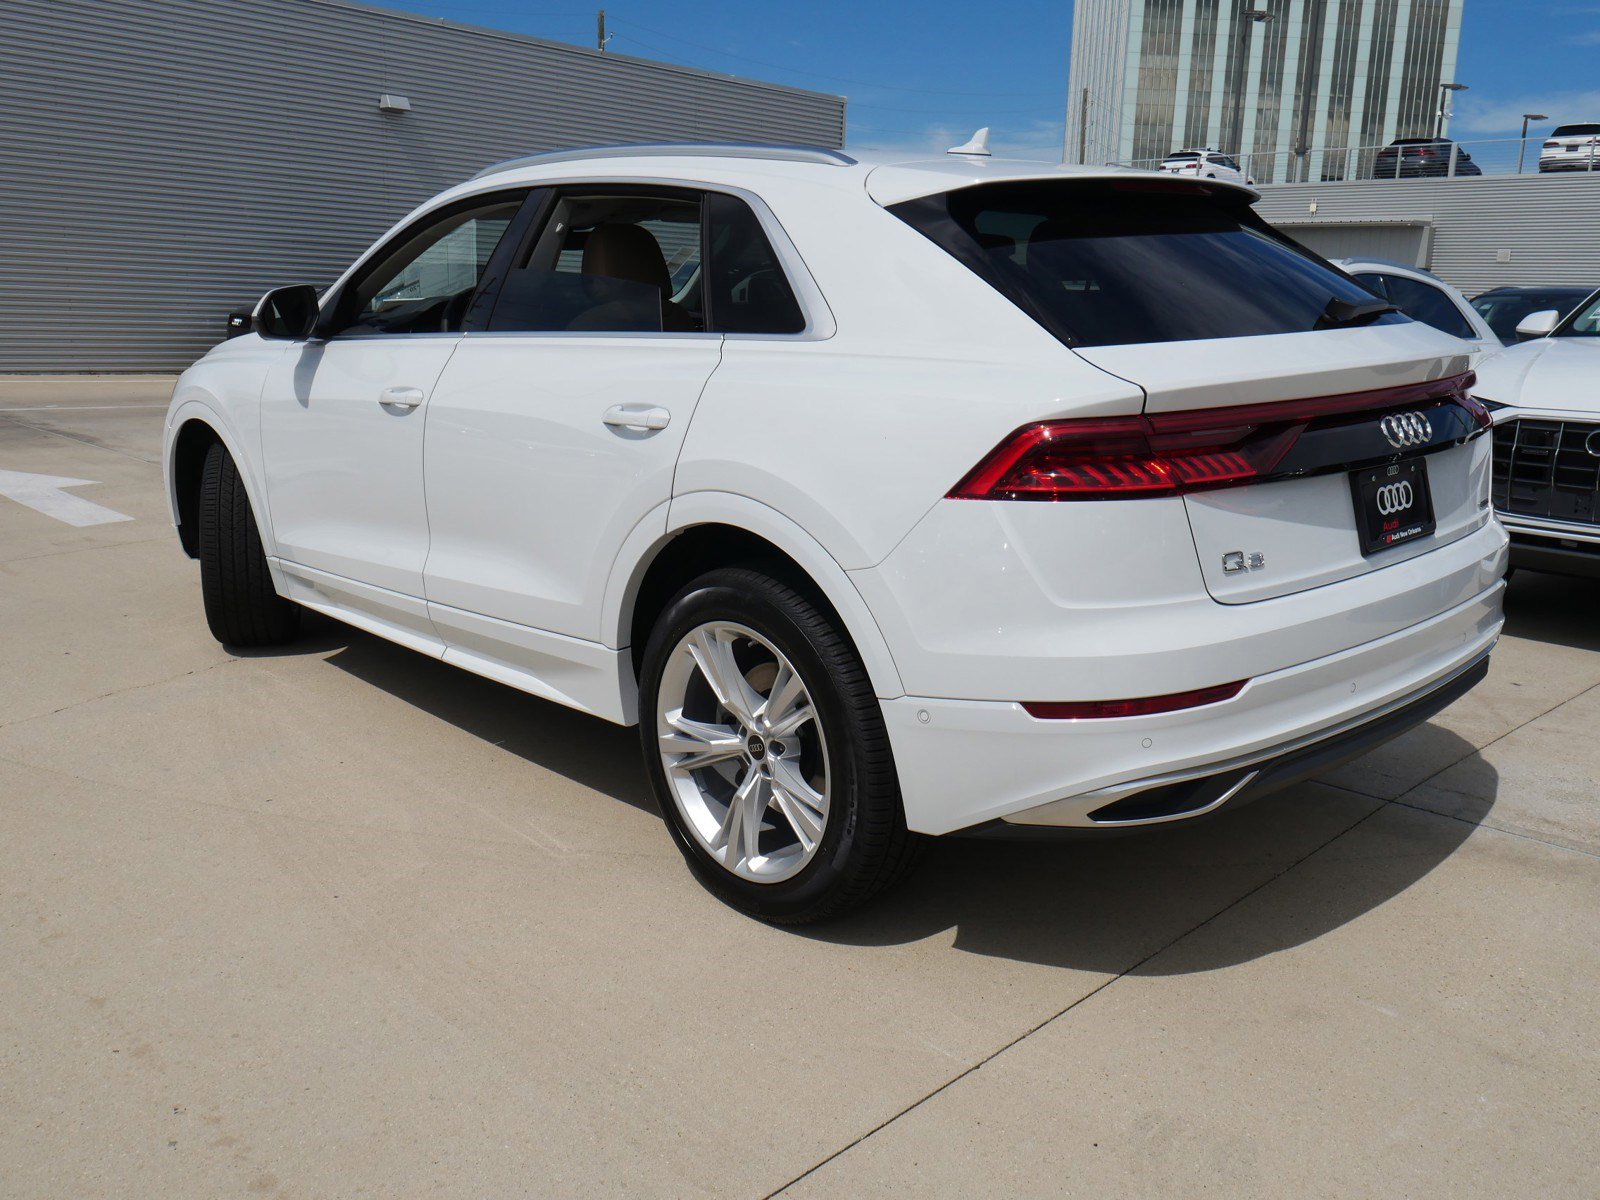 New Audi Q8 For Sale in Metairie, LA | Audi New Orleans